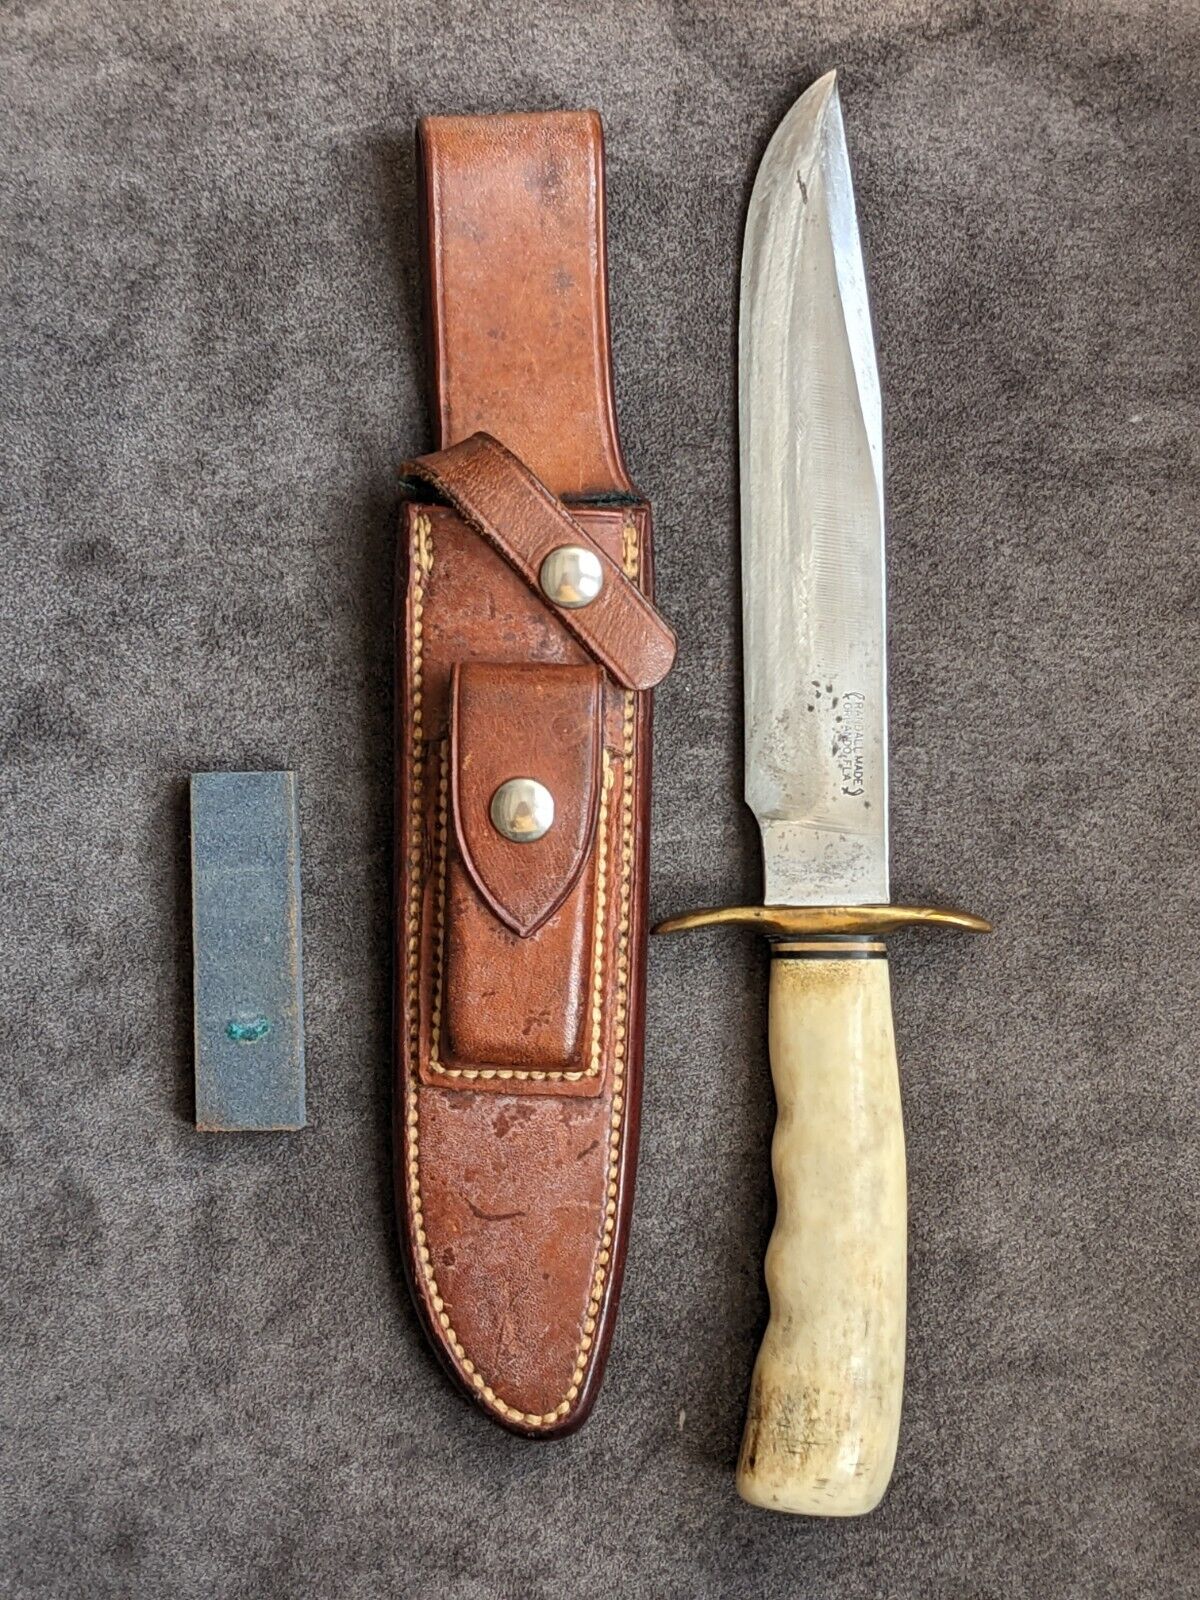 Very Rare Early 1960s (Maybe Late 50s) Antler/Stag Fighter Knife, Finger grooves